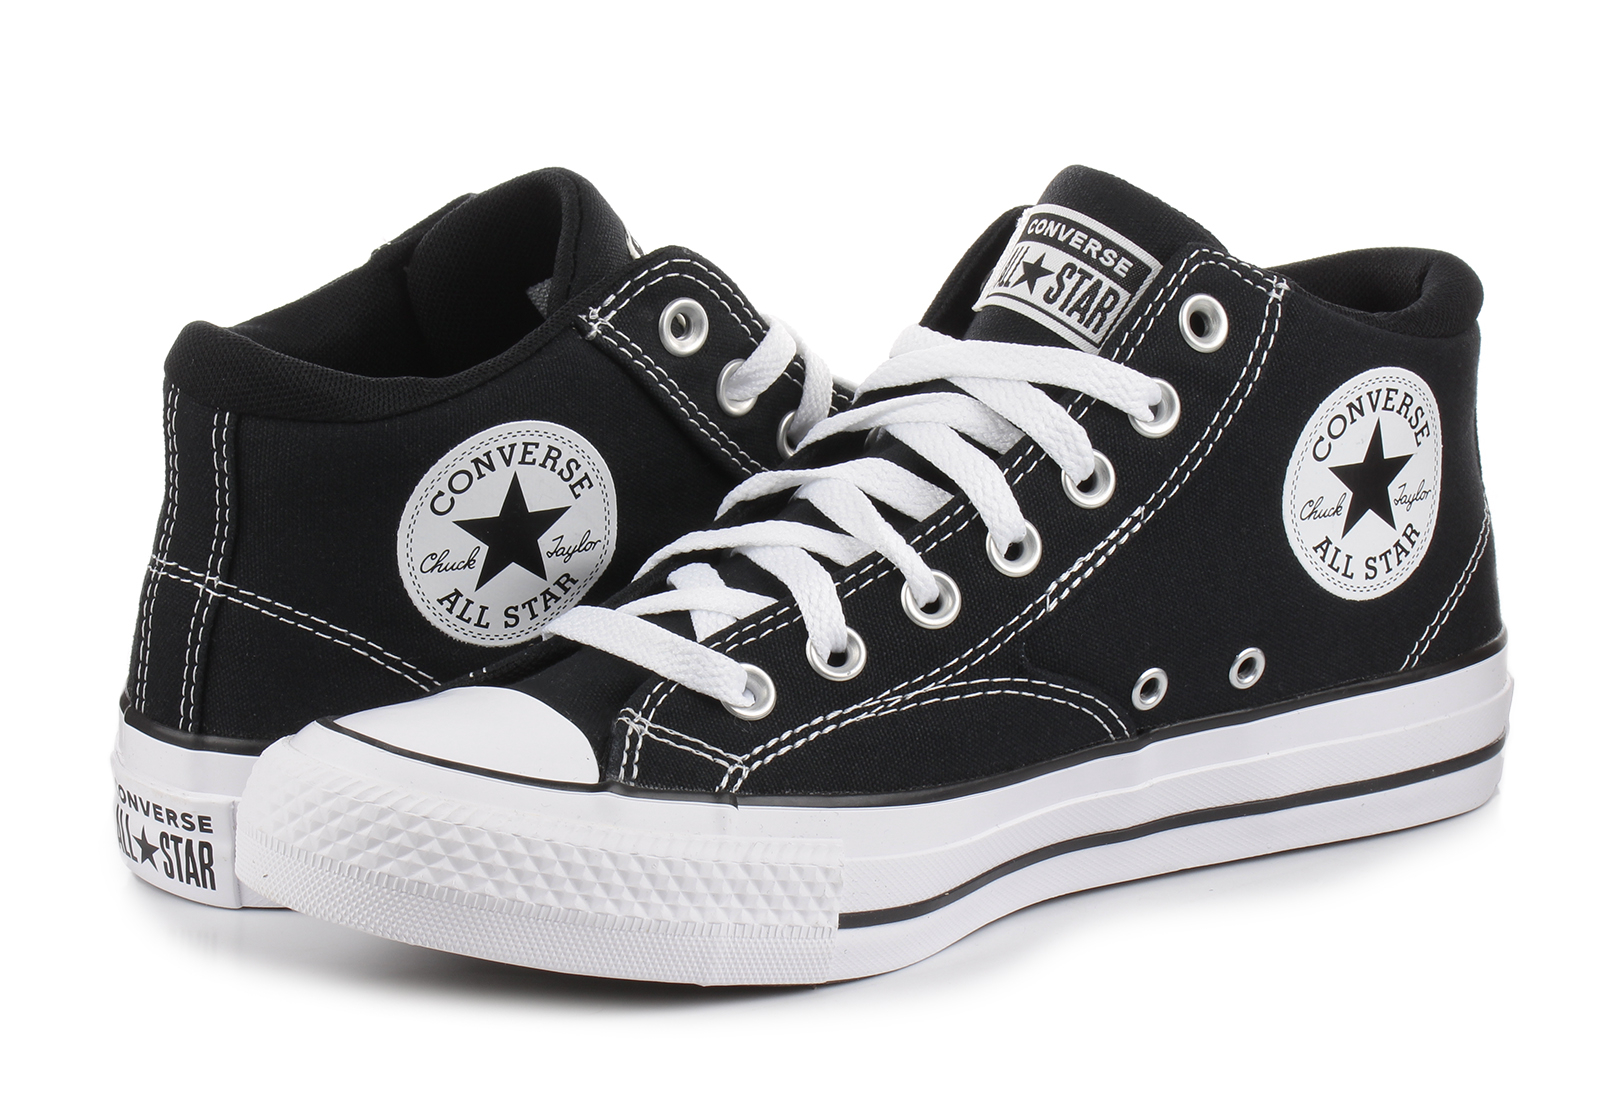 Converse High trainers - - Star Malden A00811C shoes - for All boots shop Taylor sneakers, Street and Chuck Online